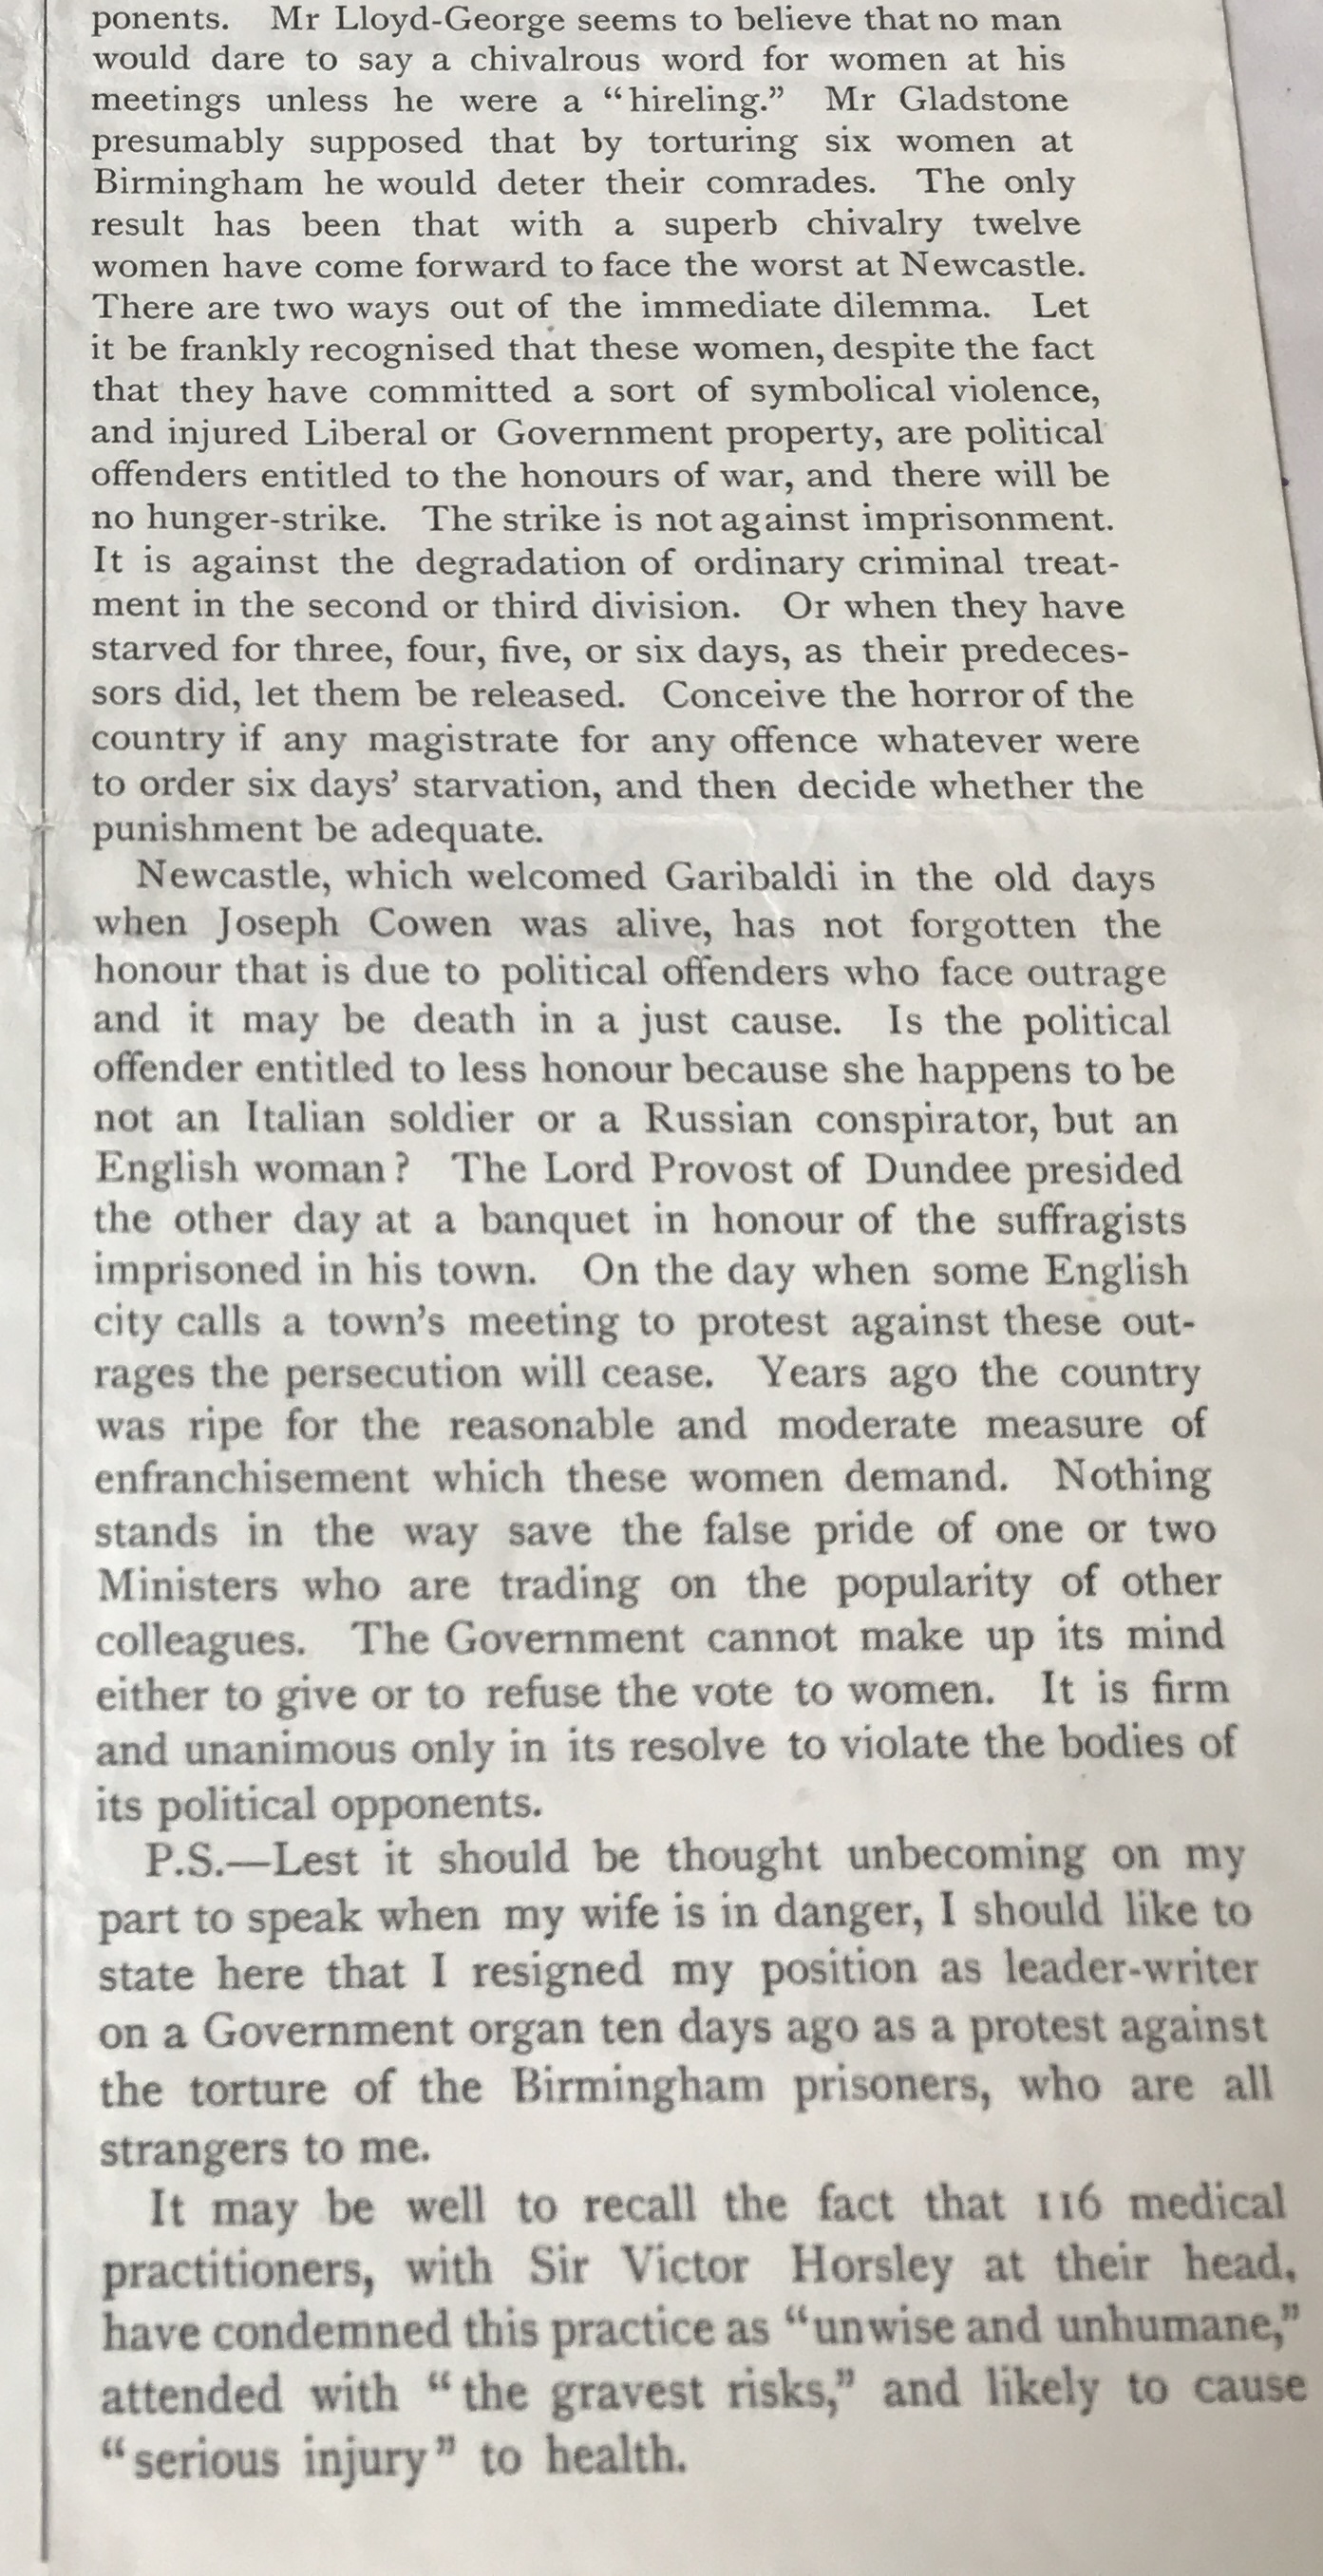 Cropped image of a published excerpt from the article 'Militant Suffragists in Newcastle' by H. N. Brailsford